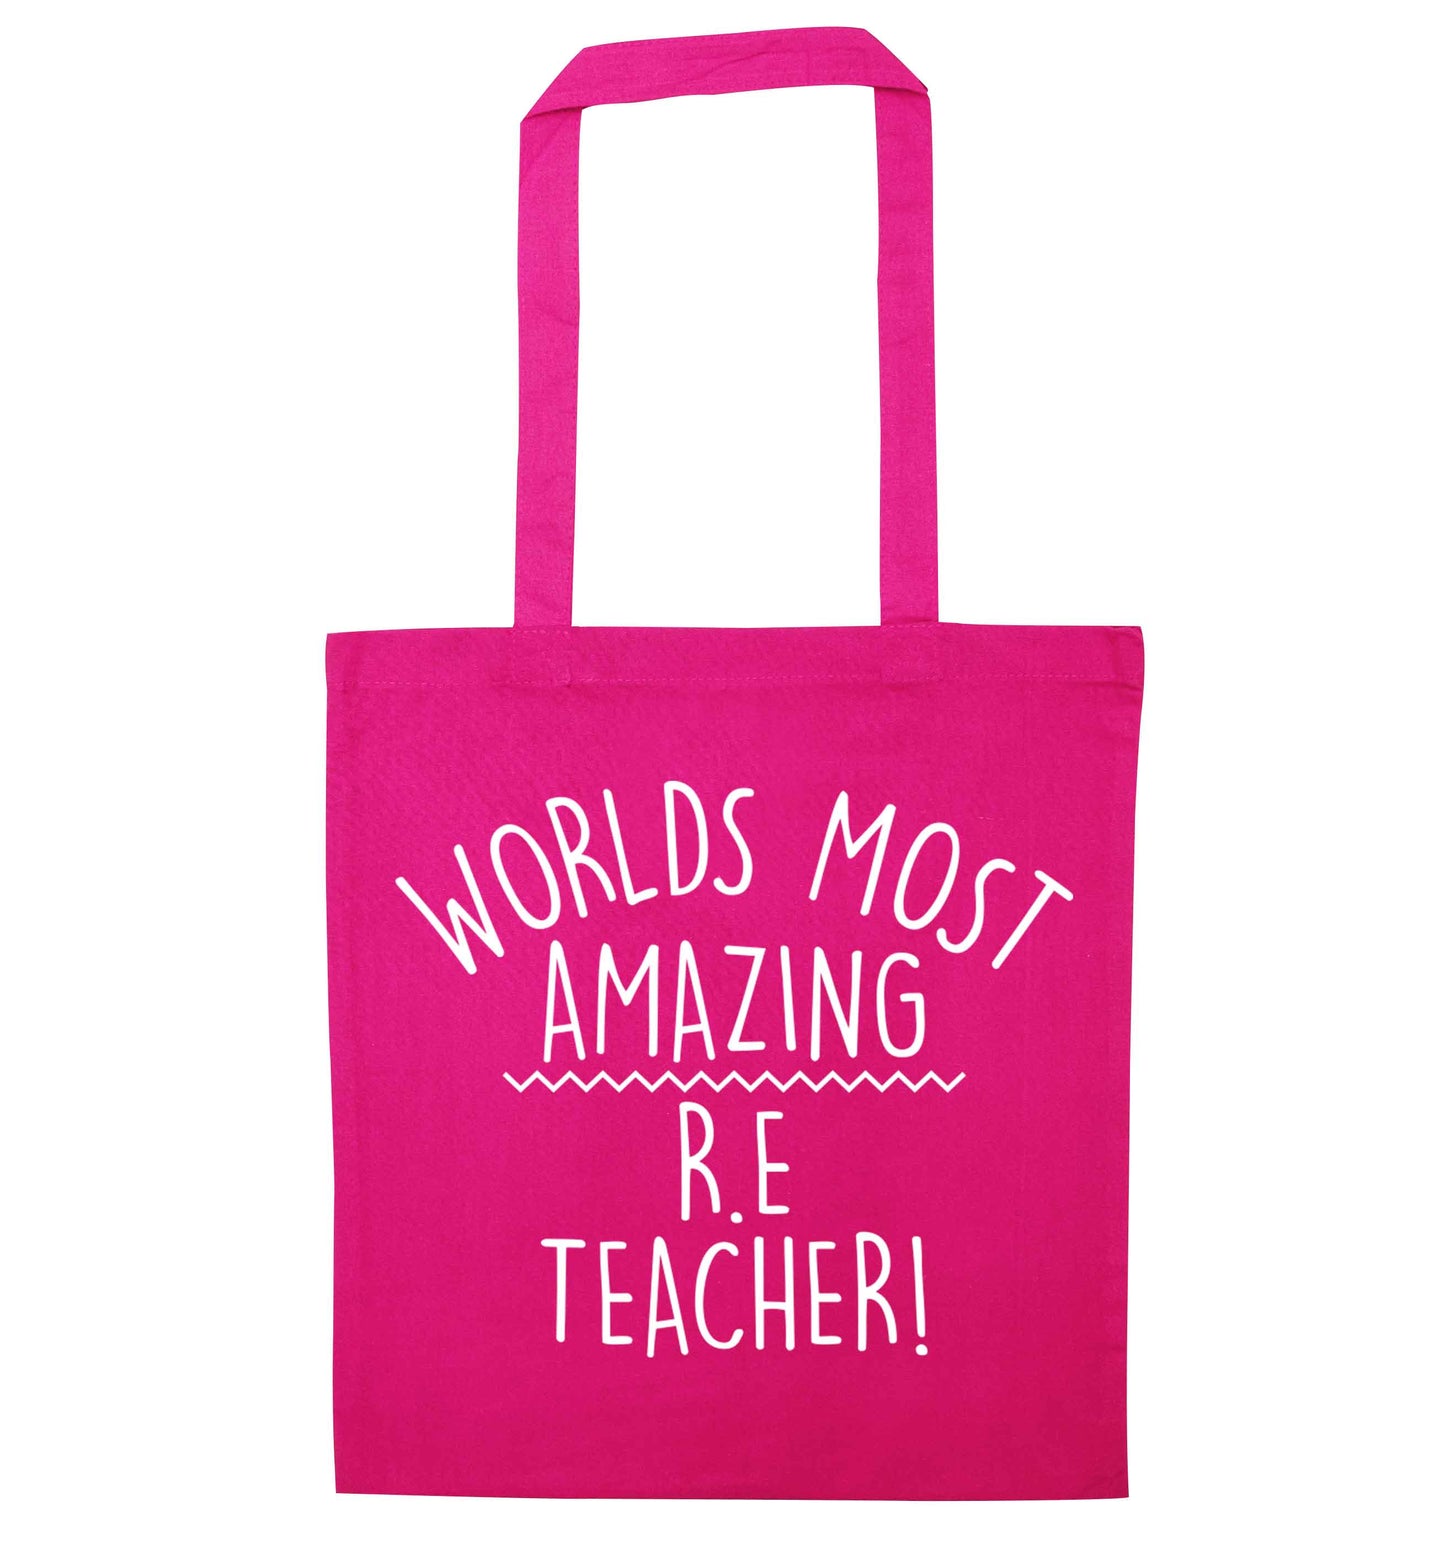 Worlds most amazing R.E teacher pink tote bag